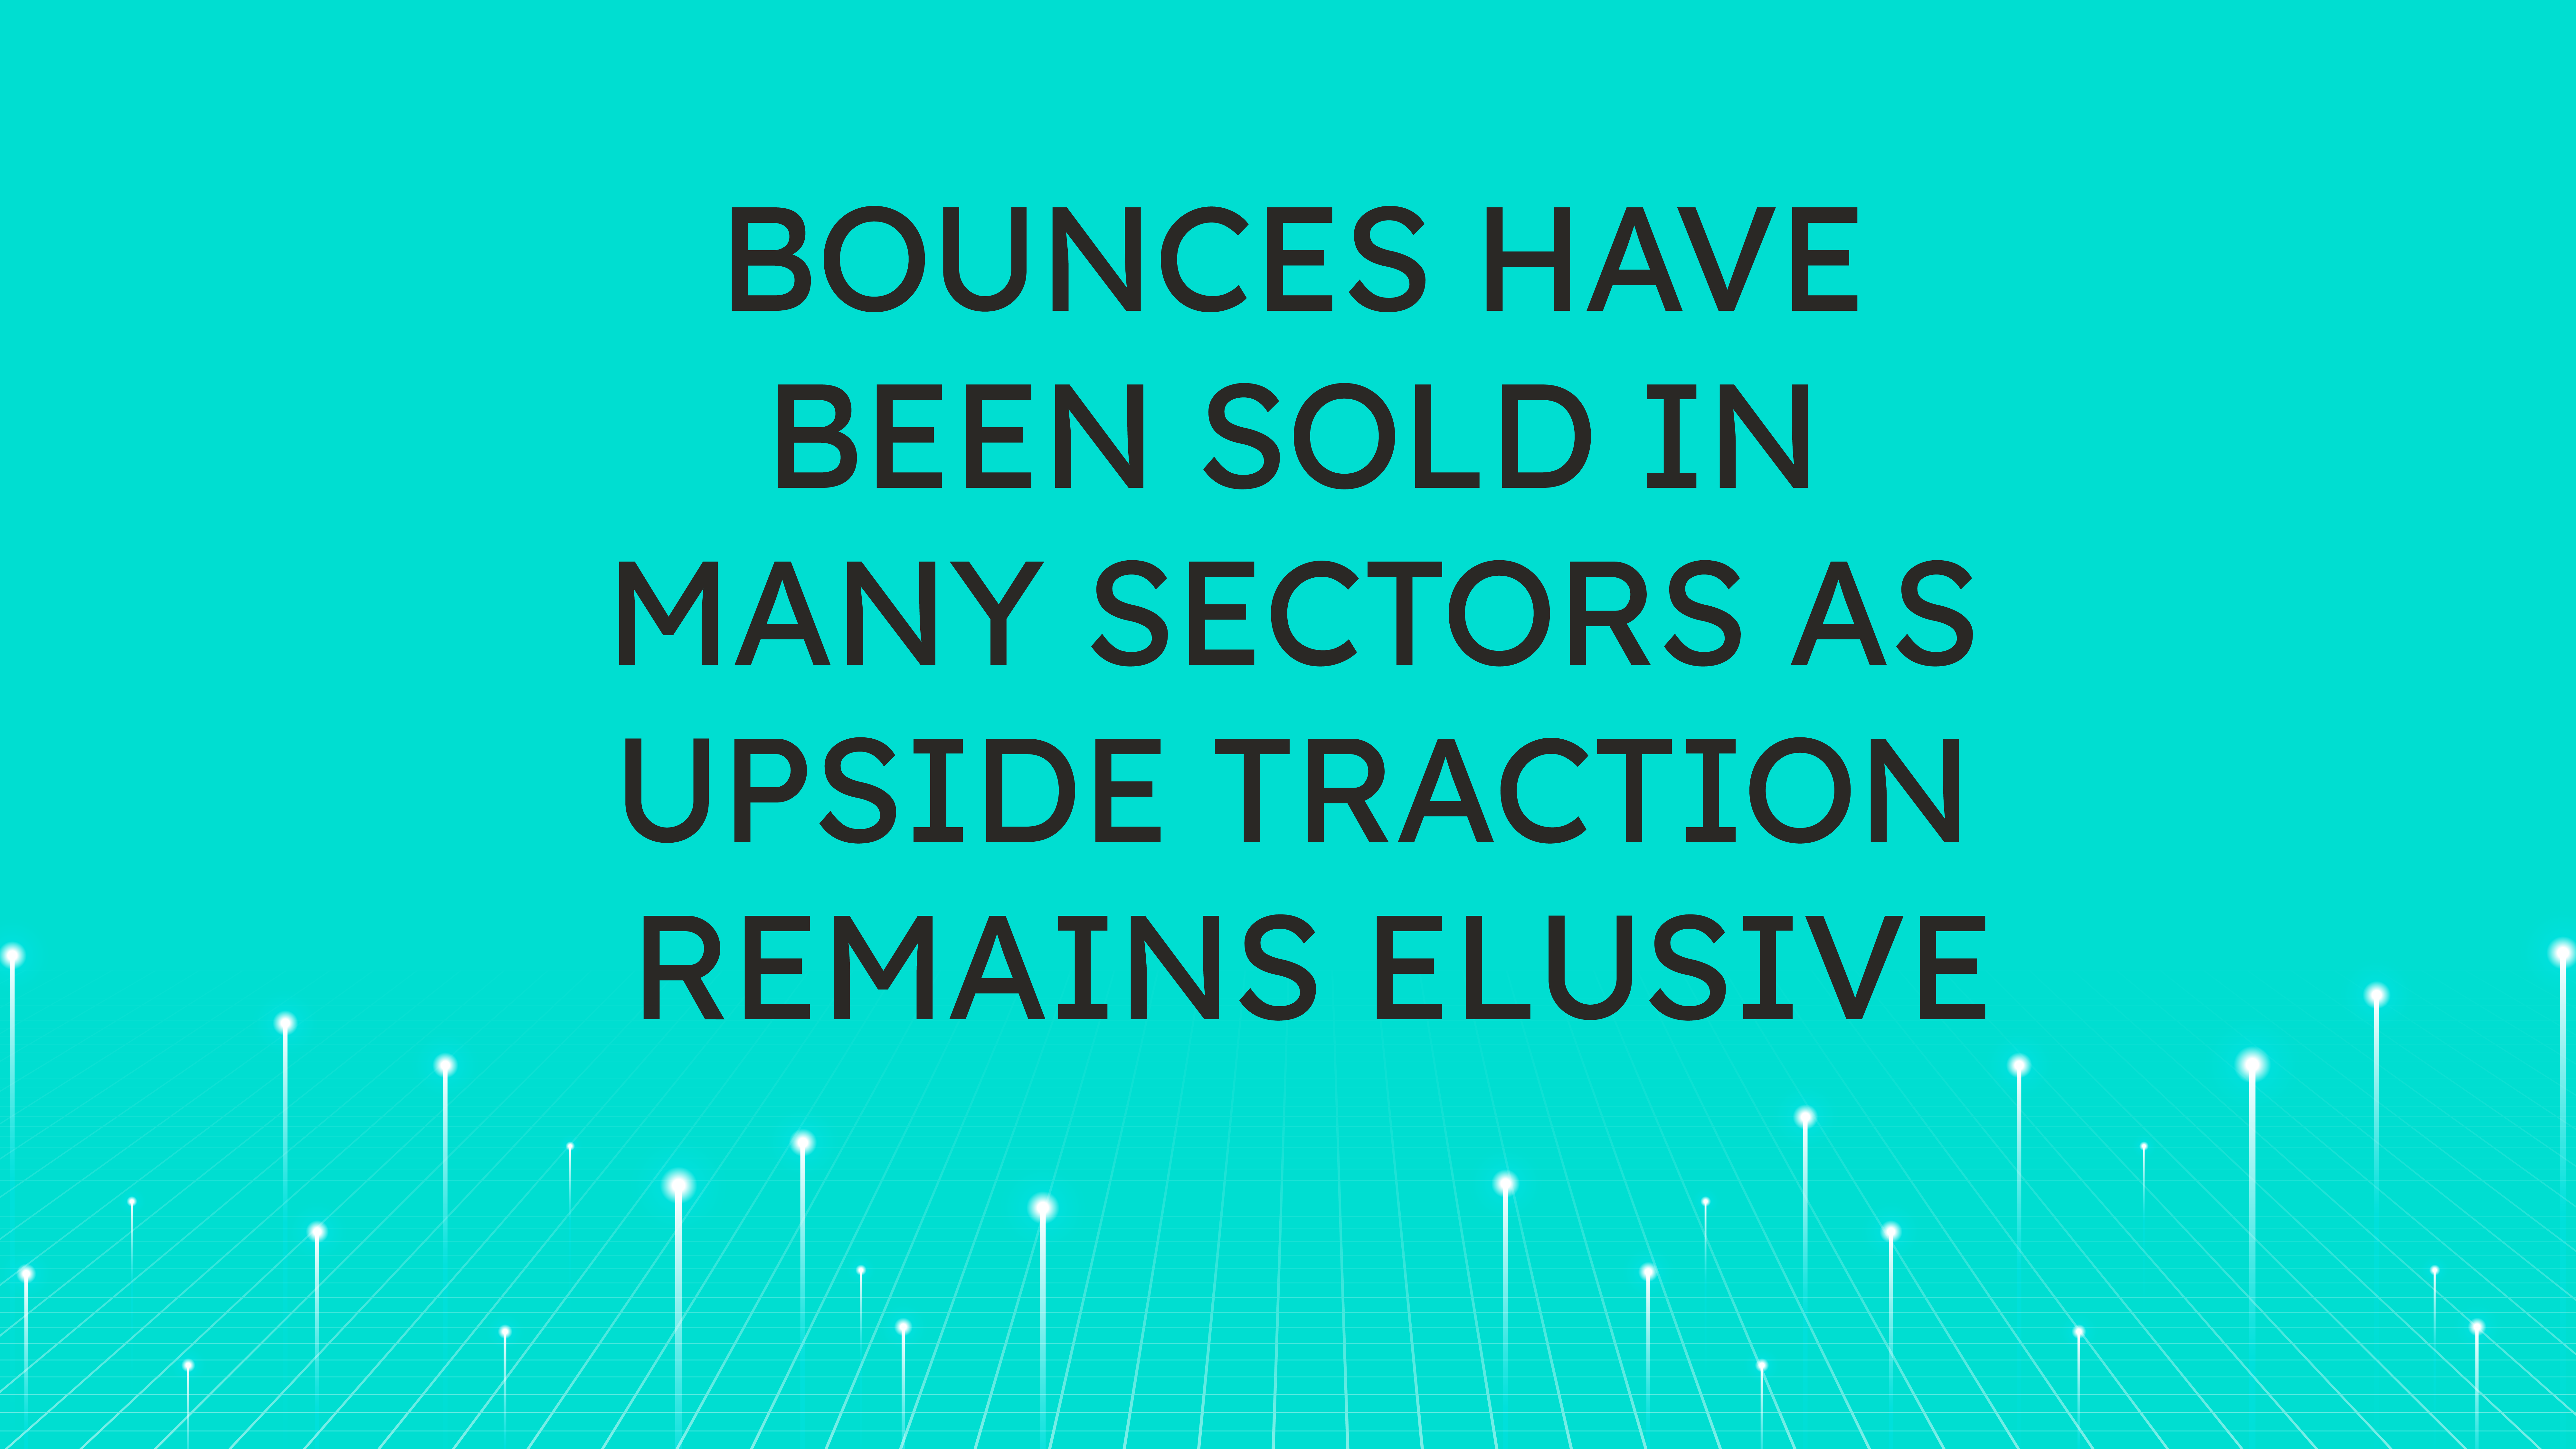 Bounces Have Been Sold in Many Sectors as Upside Traction Remains Elusive